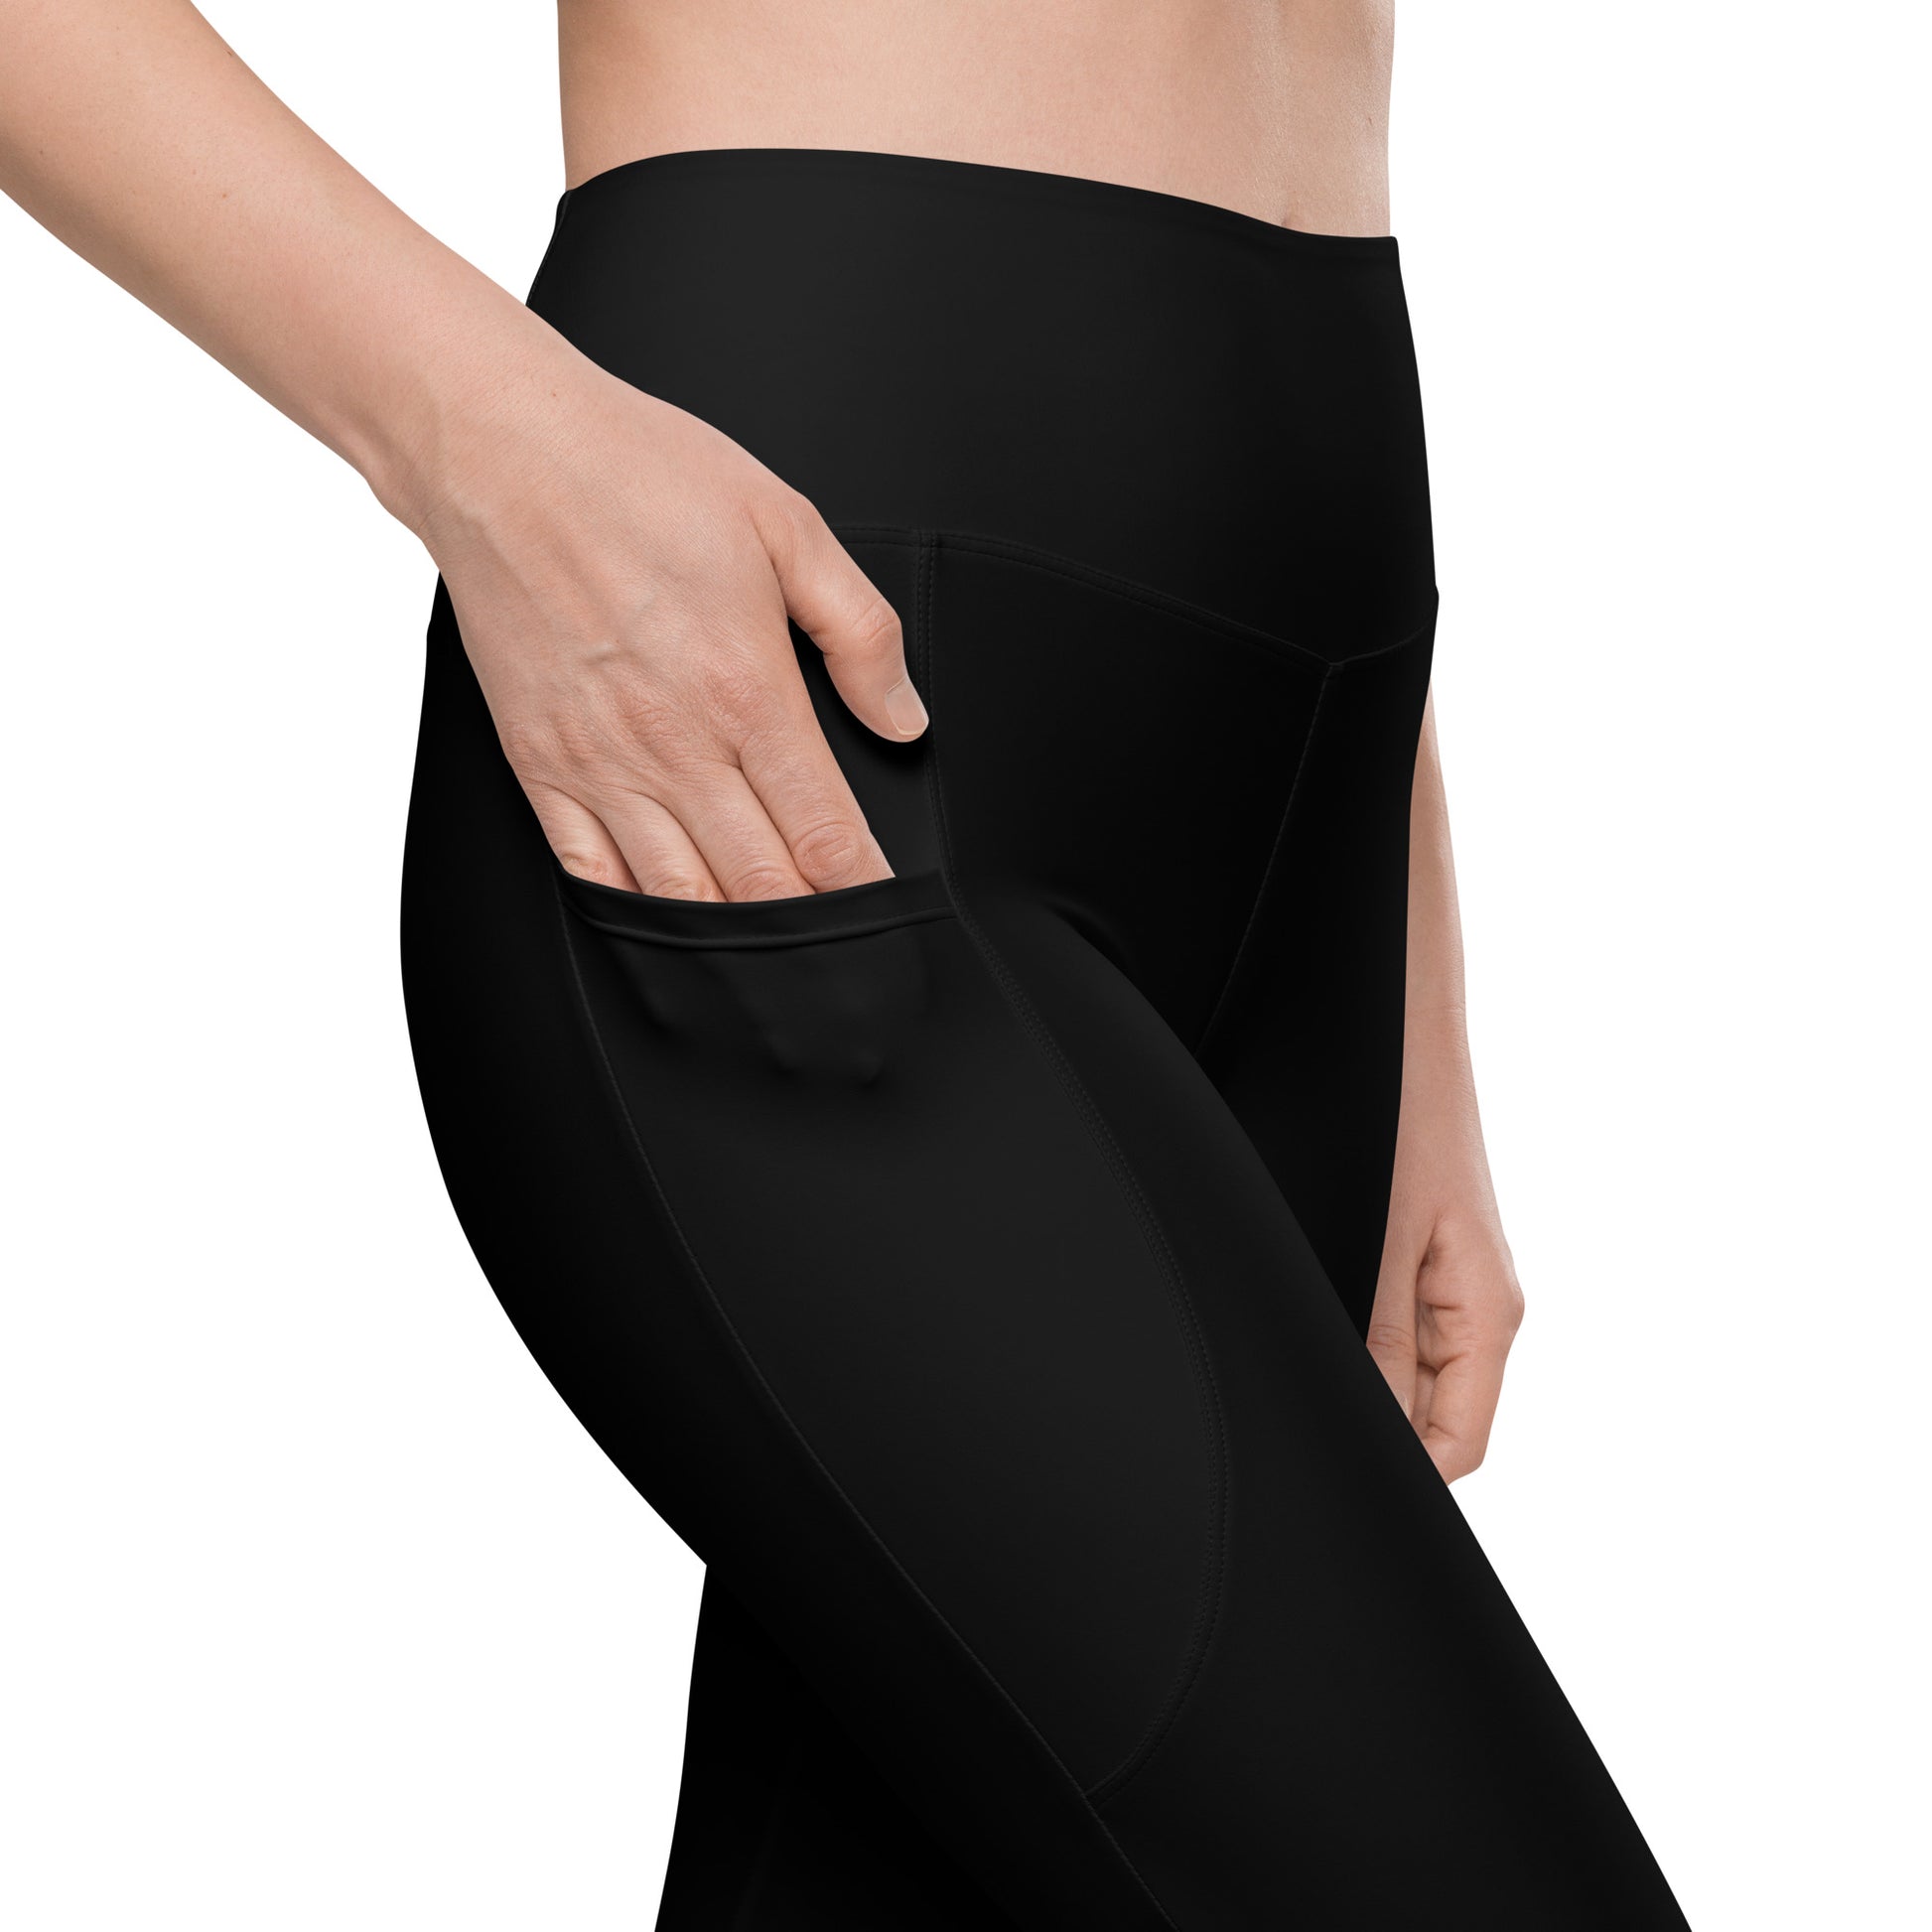 LifeSky High Waist Yoga Pants Workout Leggings for Women with Pockets Tummy  Control Soft Pants, M in Bahrain